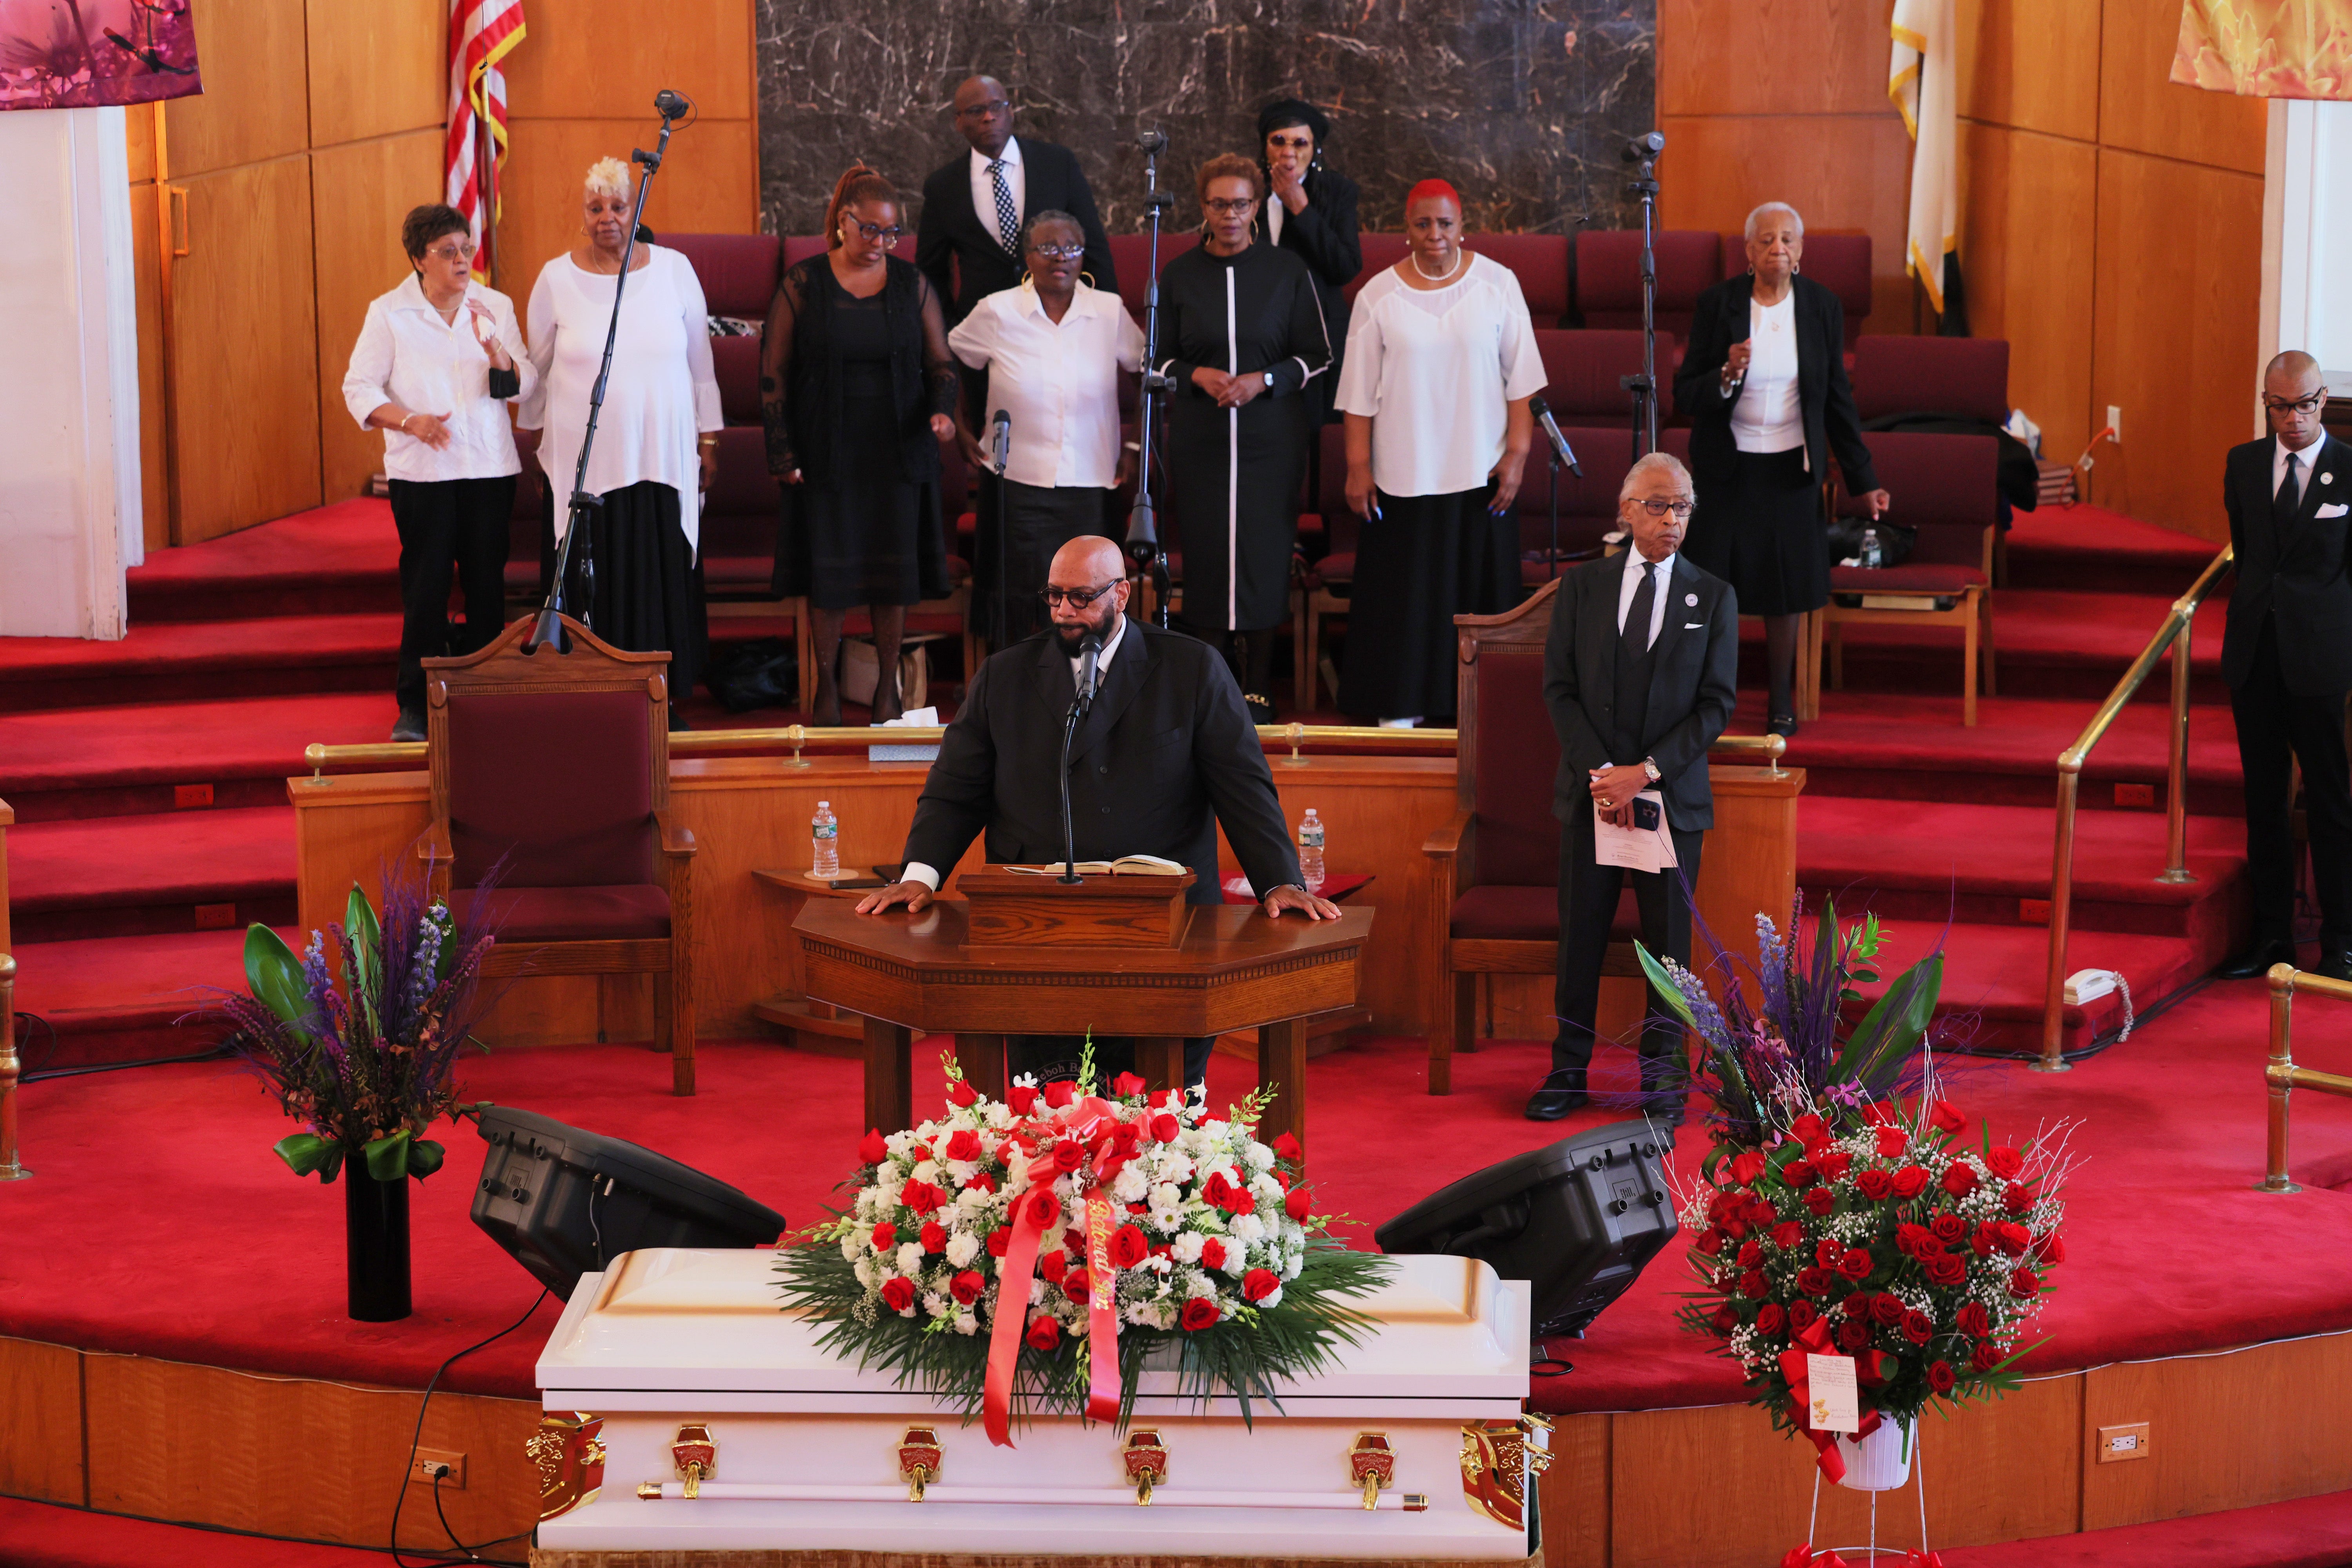 Rev Dr Johnnie Green presides over the public viewing and funeral service of Jordan Neely at Mount Neboh Baptist Church in Harlem on 19 May.